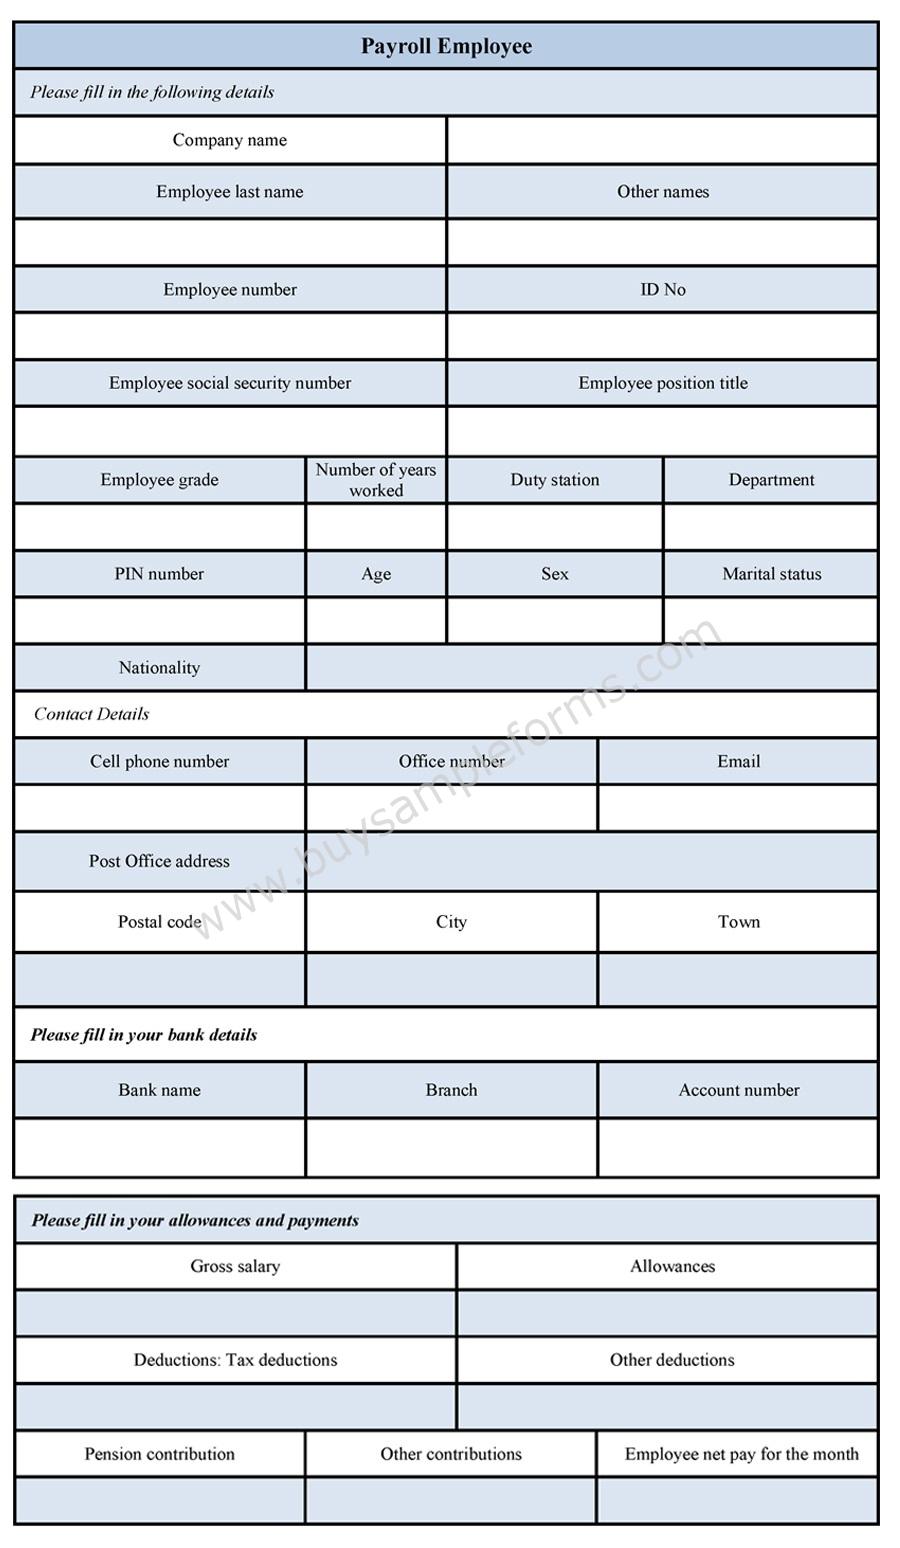 employee payroll forms template